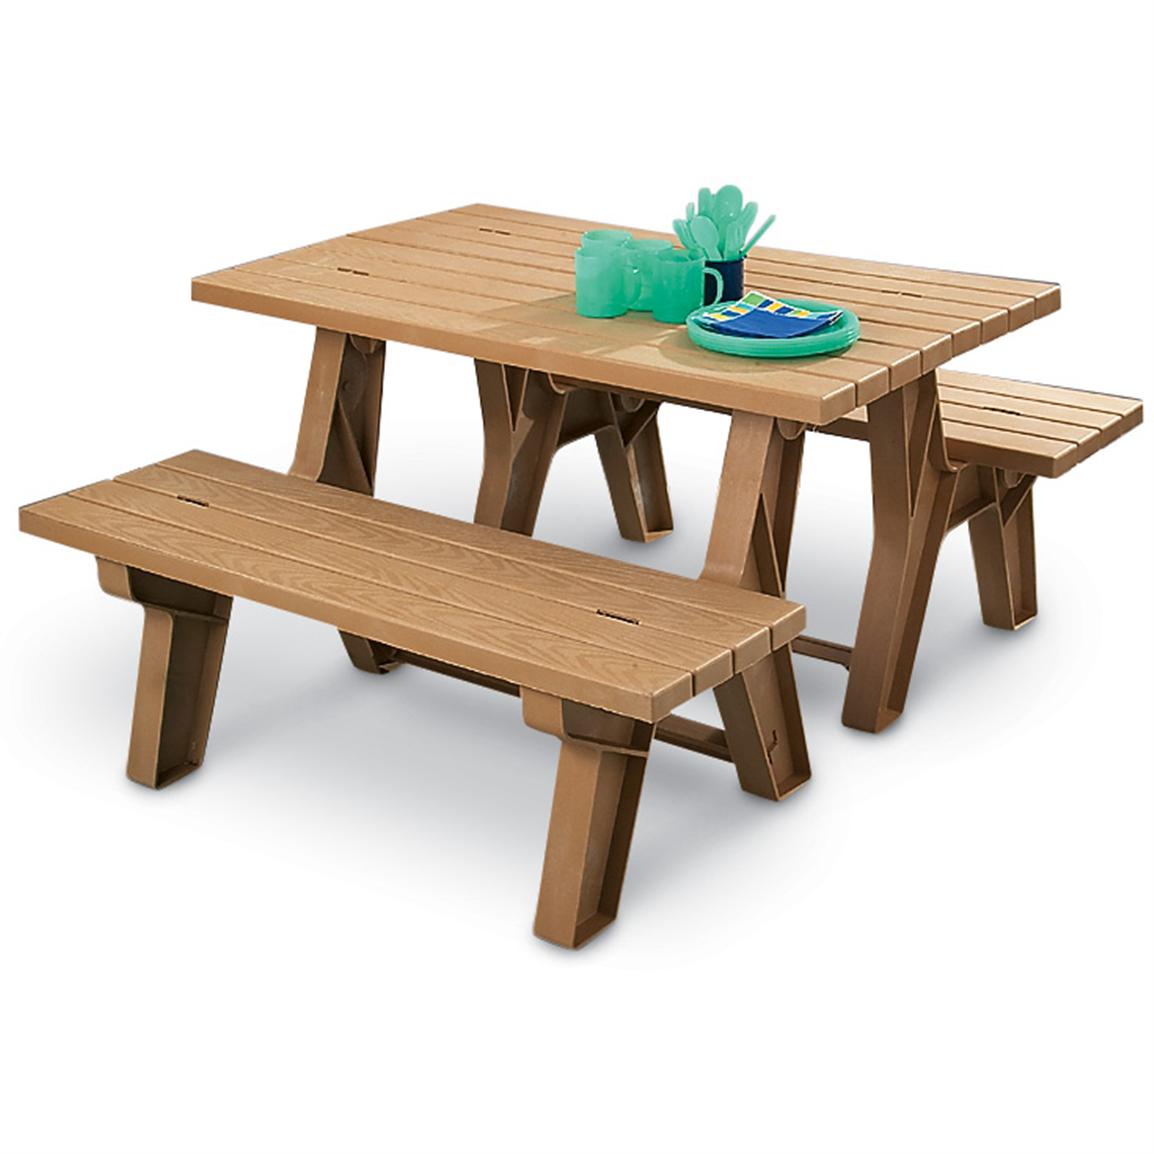 Convertible Bench Picnic Table Patio Furniture